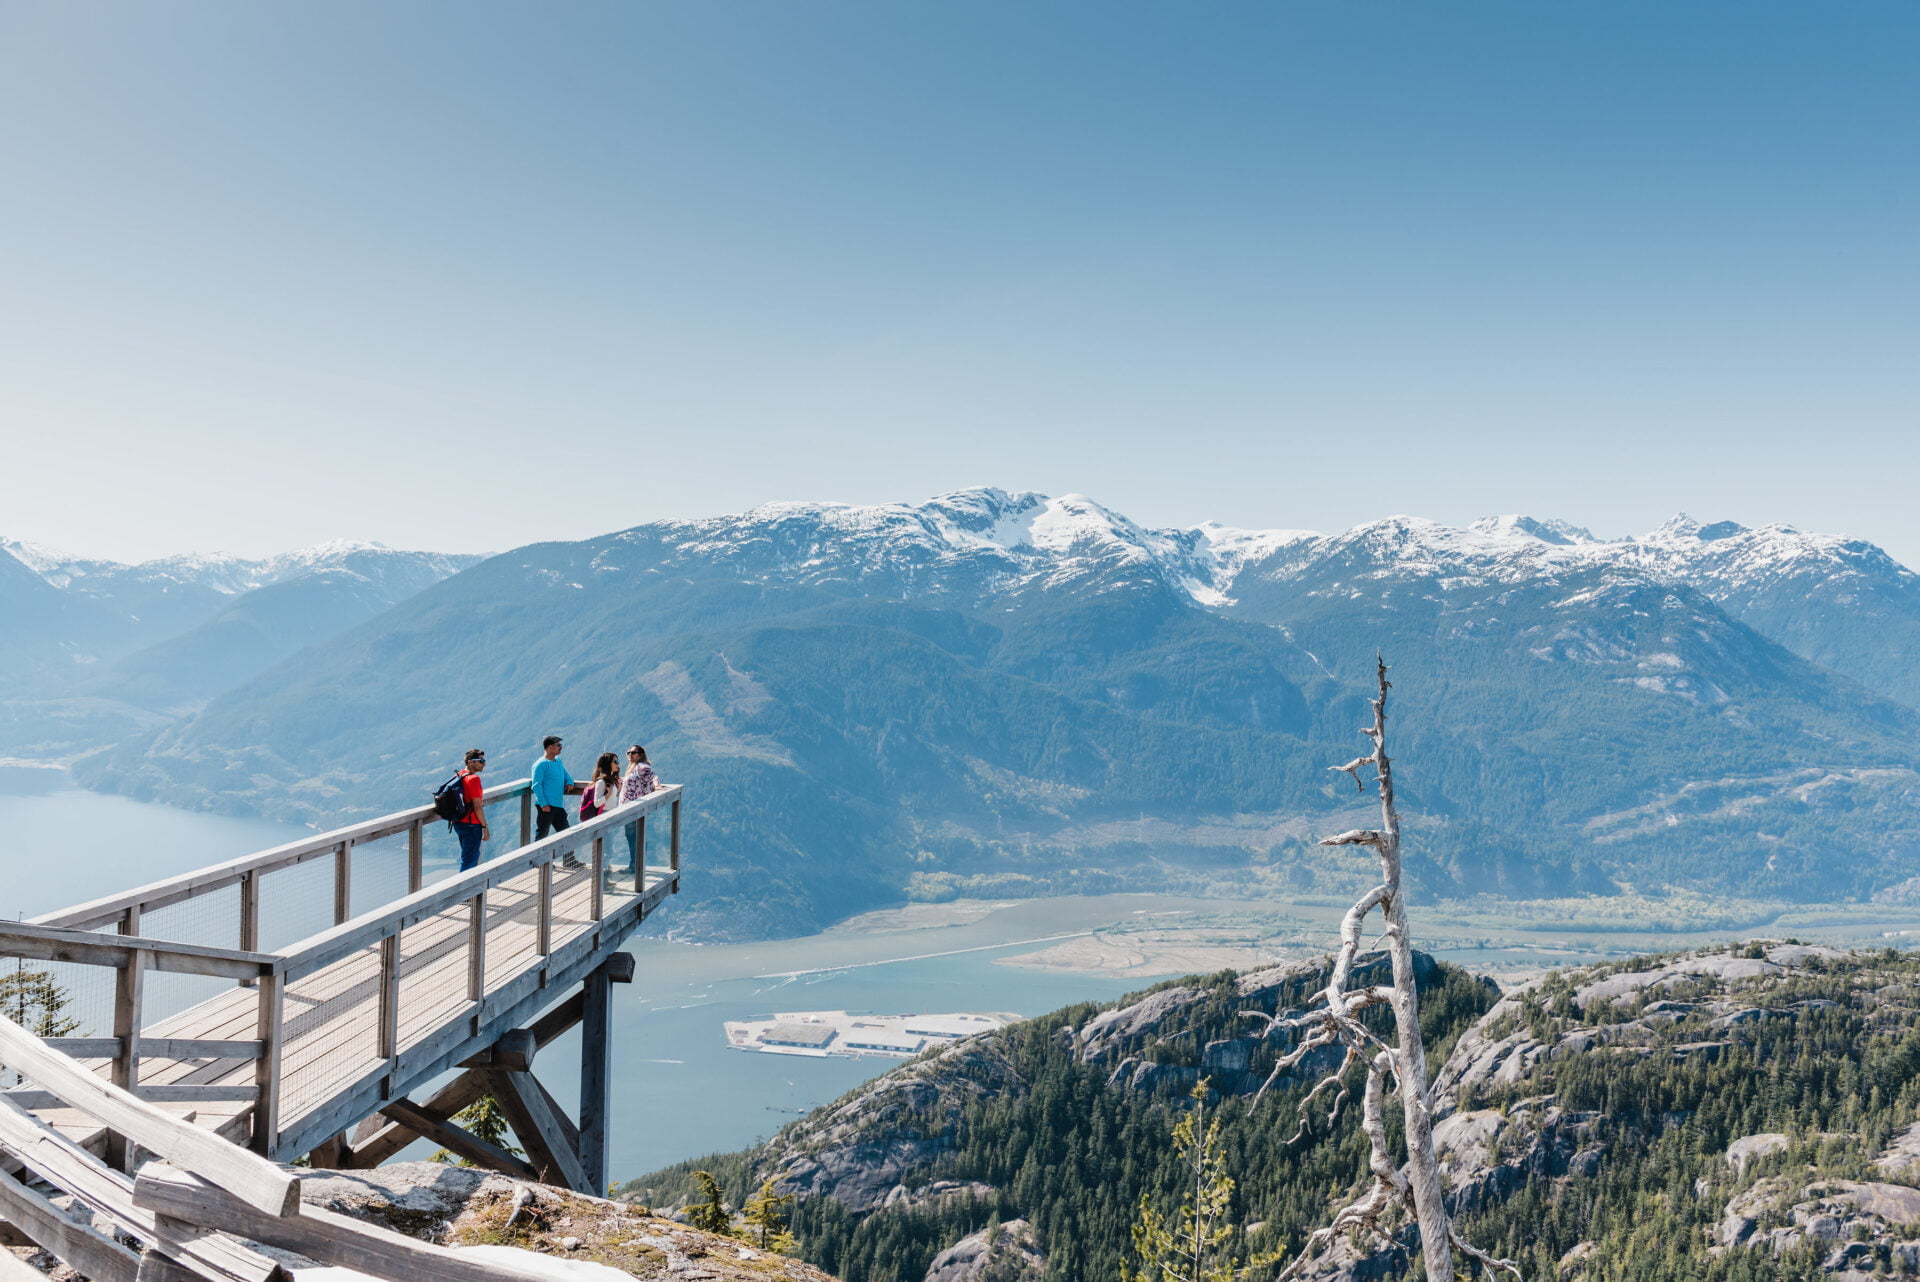 4 people standing on a lookout platform above squamish